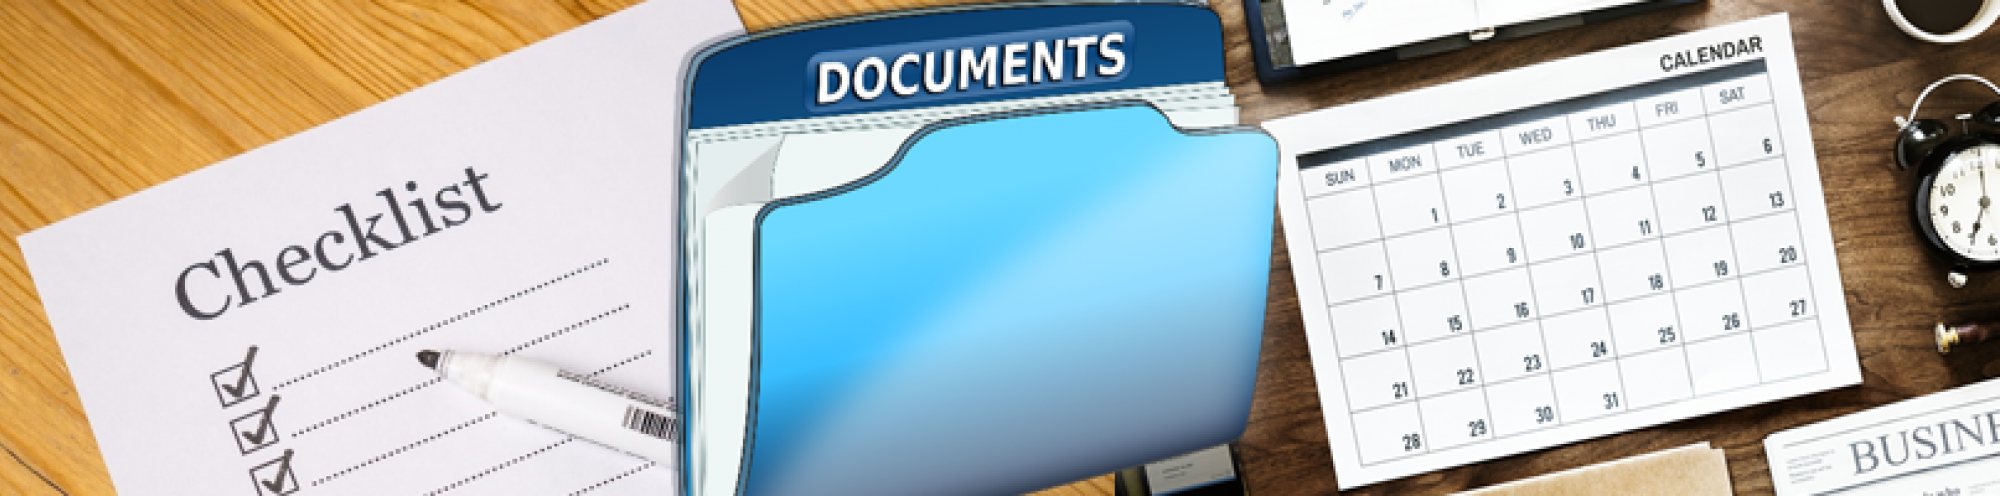 Documents Banner